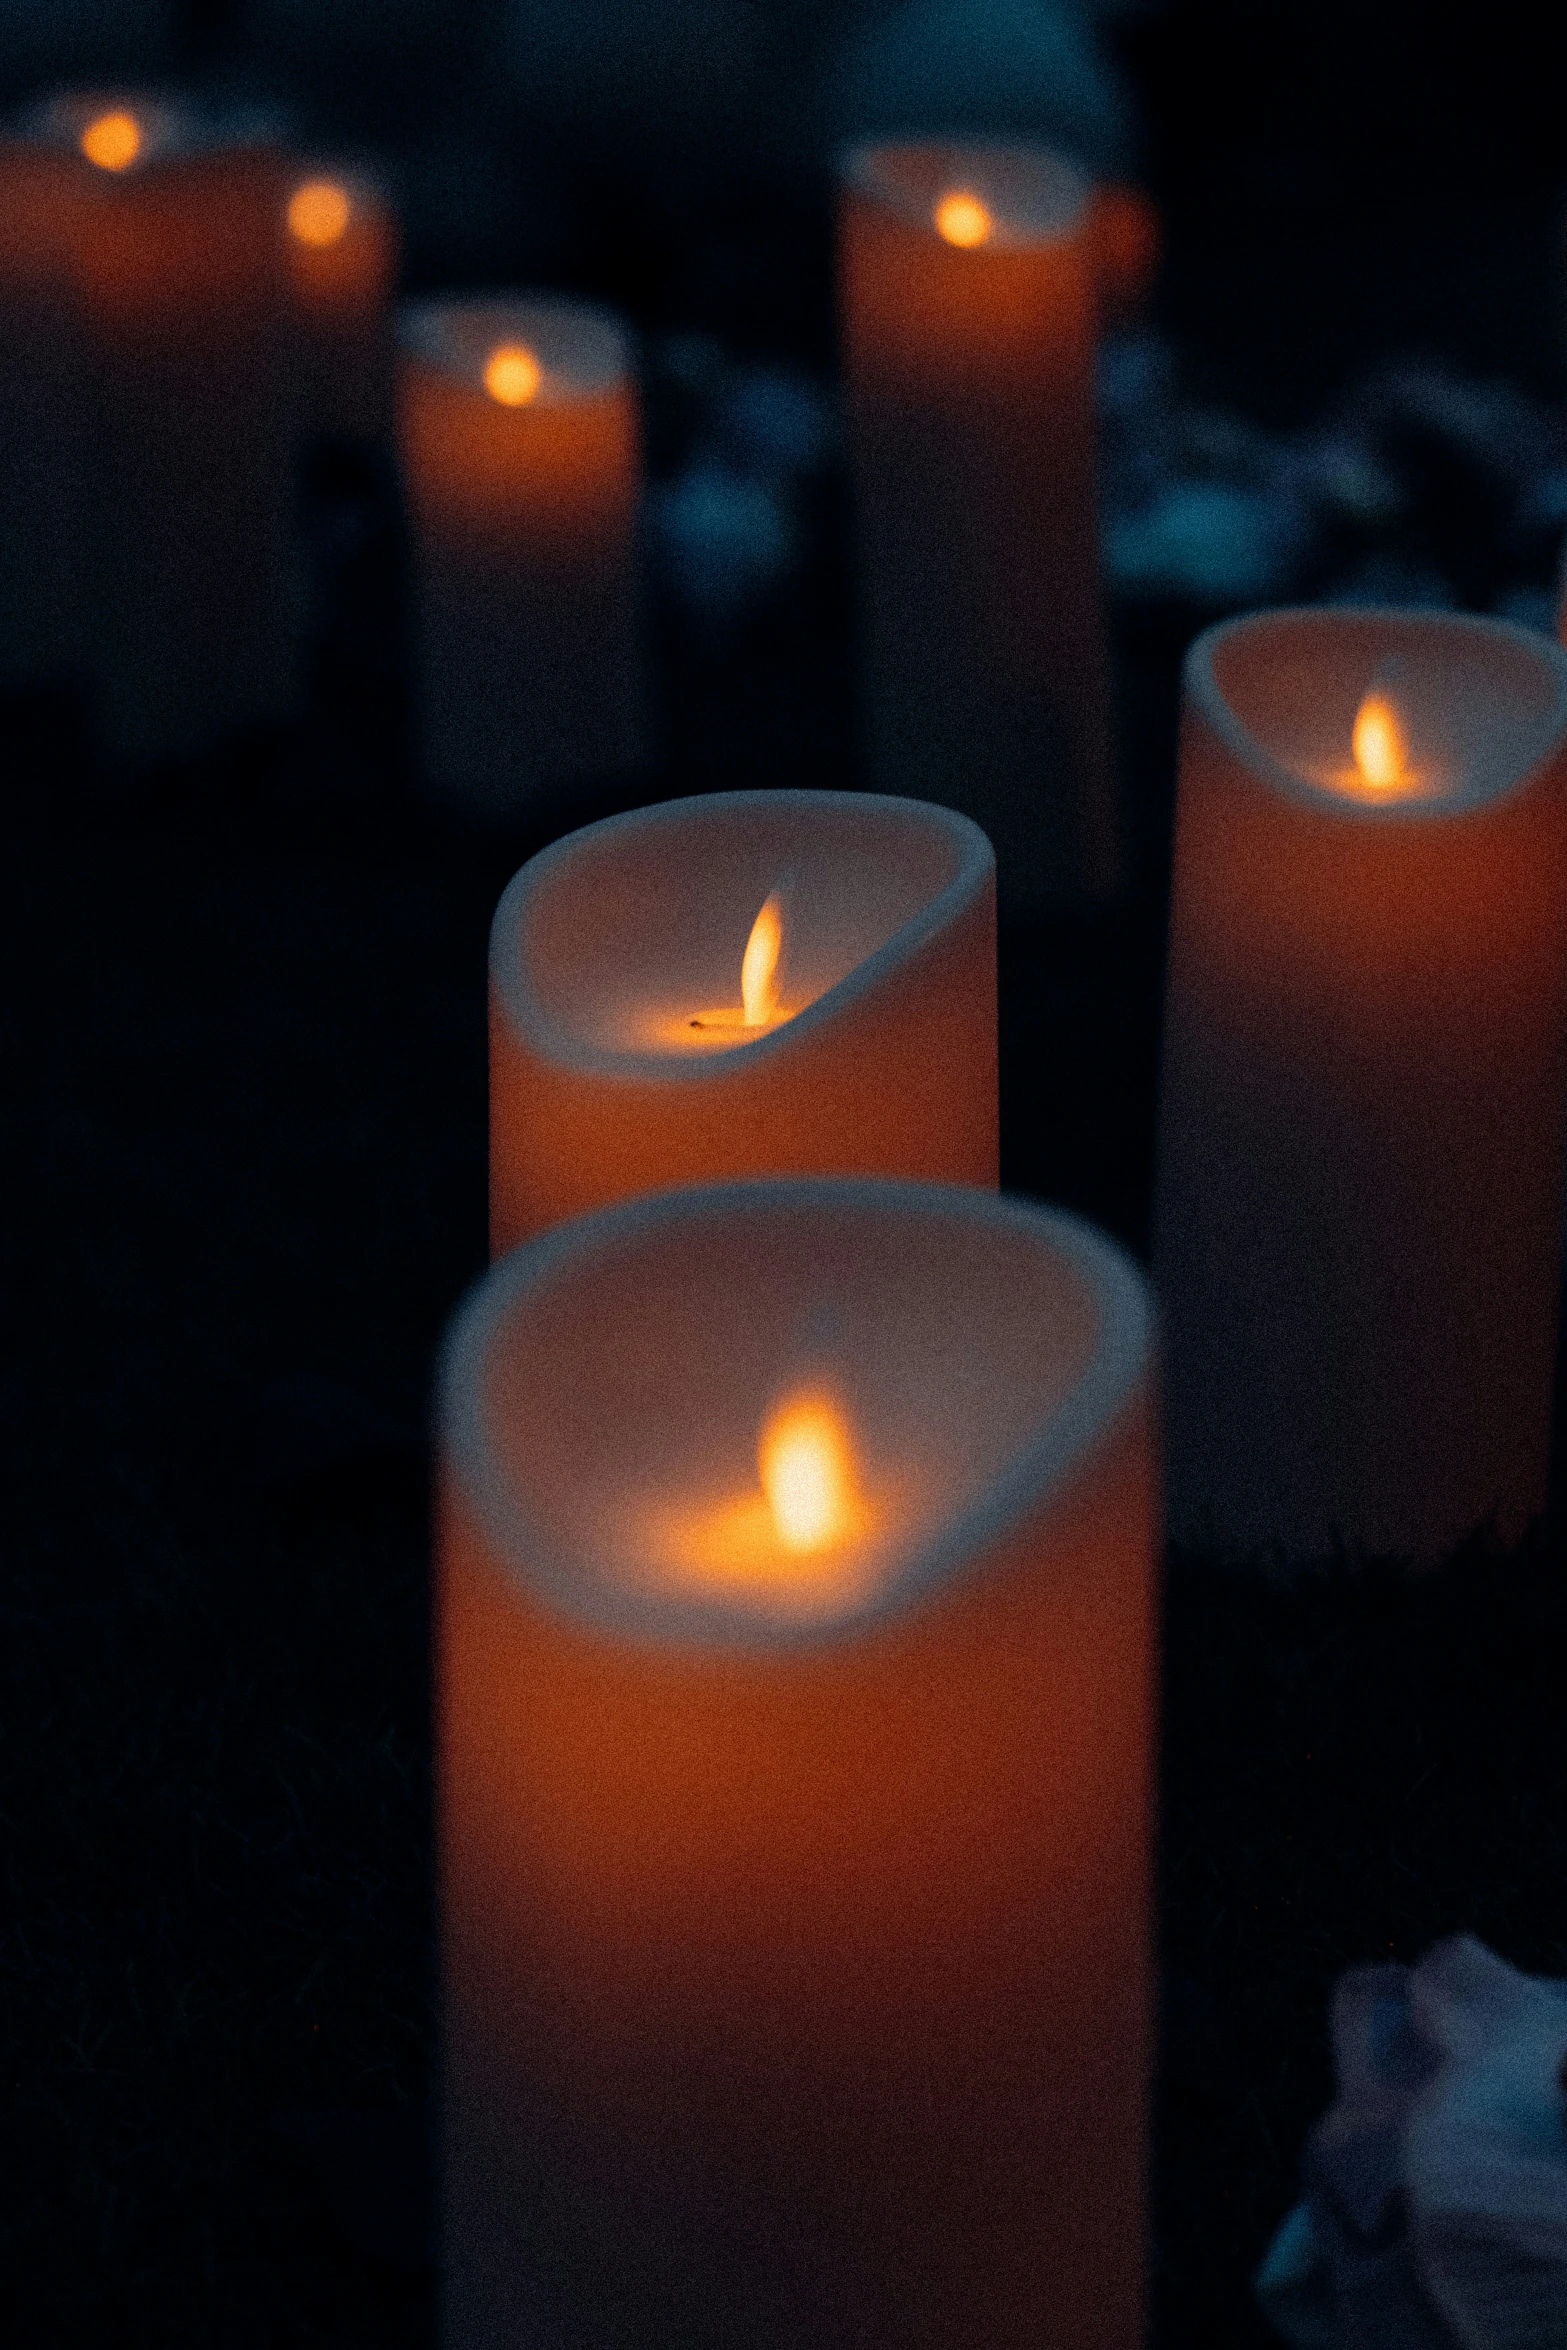 lit candles are on a black background